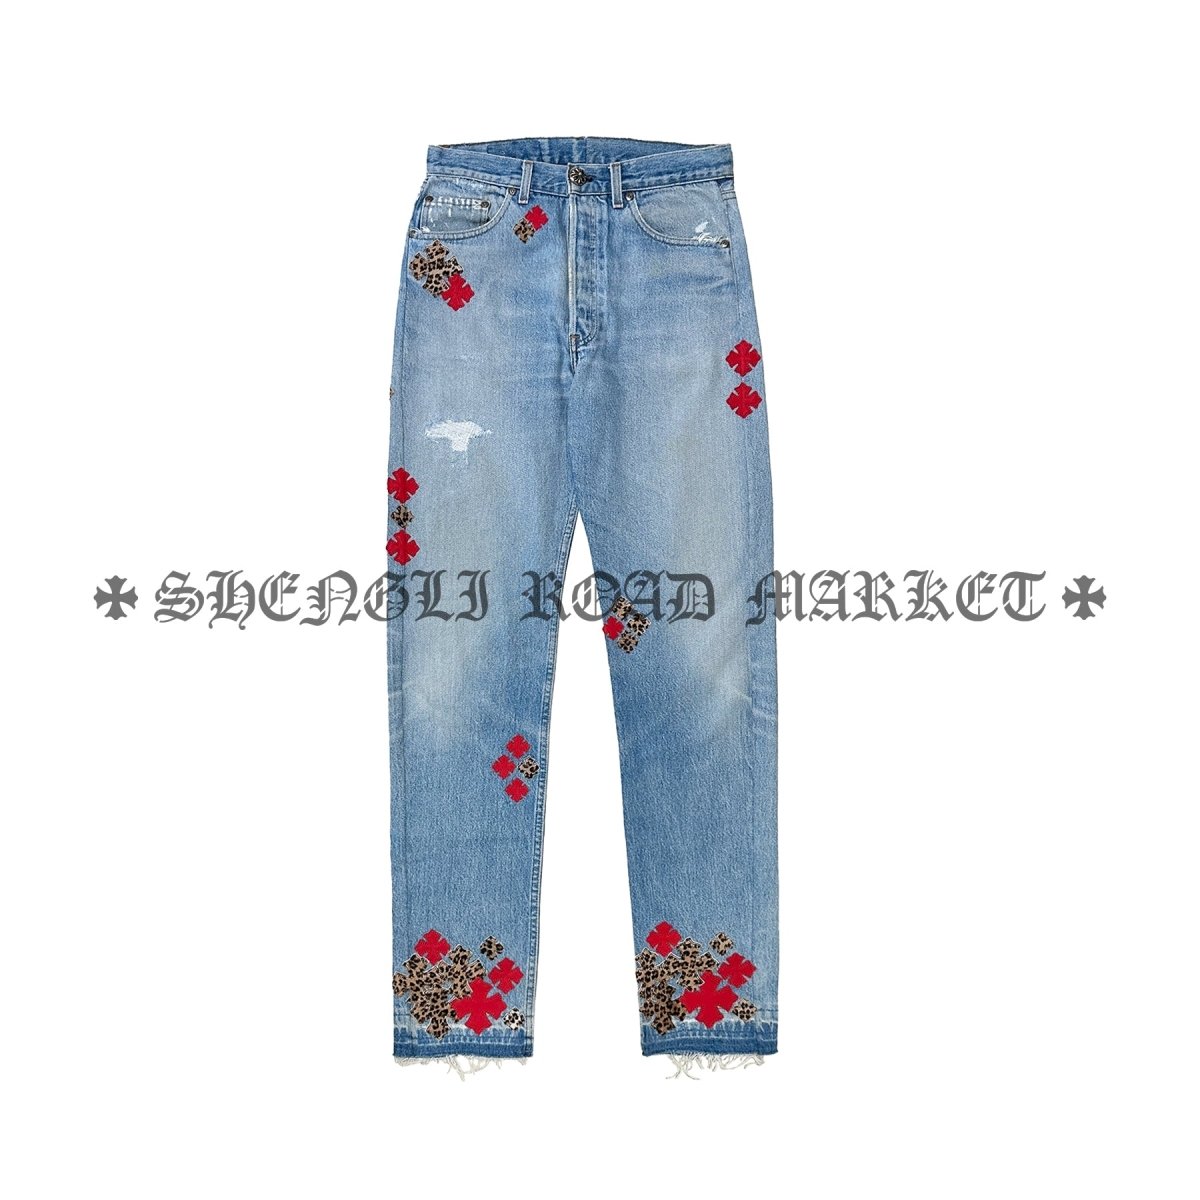 Chrome Hearts 1of1 Suede Red & Leopard Cross Patch Jeans - SHENGLI ROAD MARKET